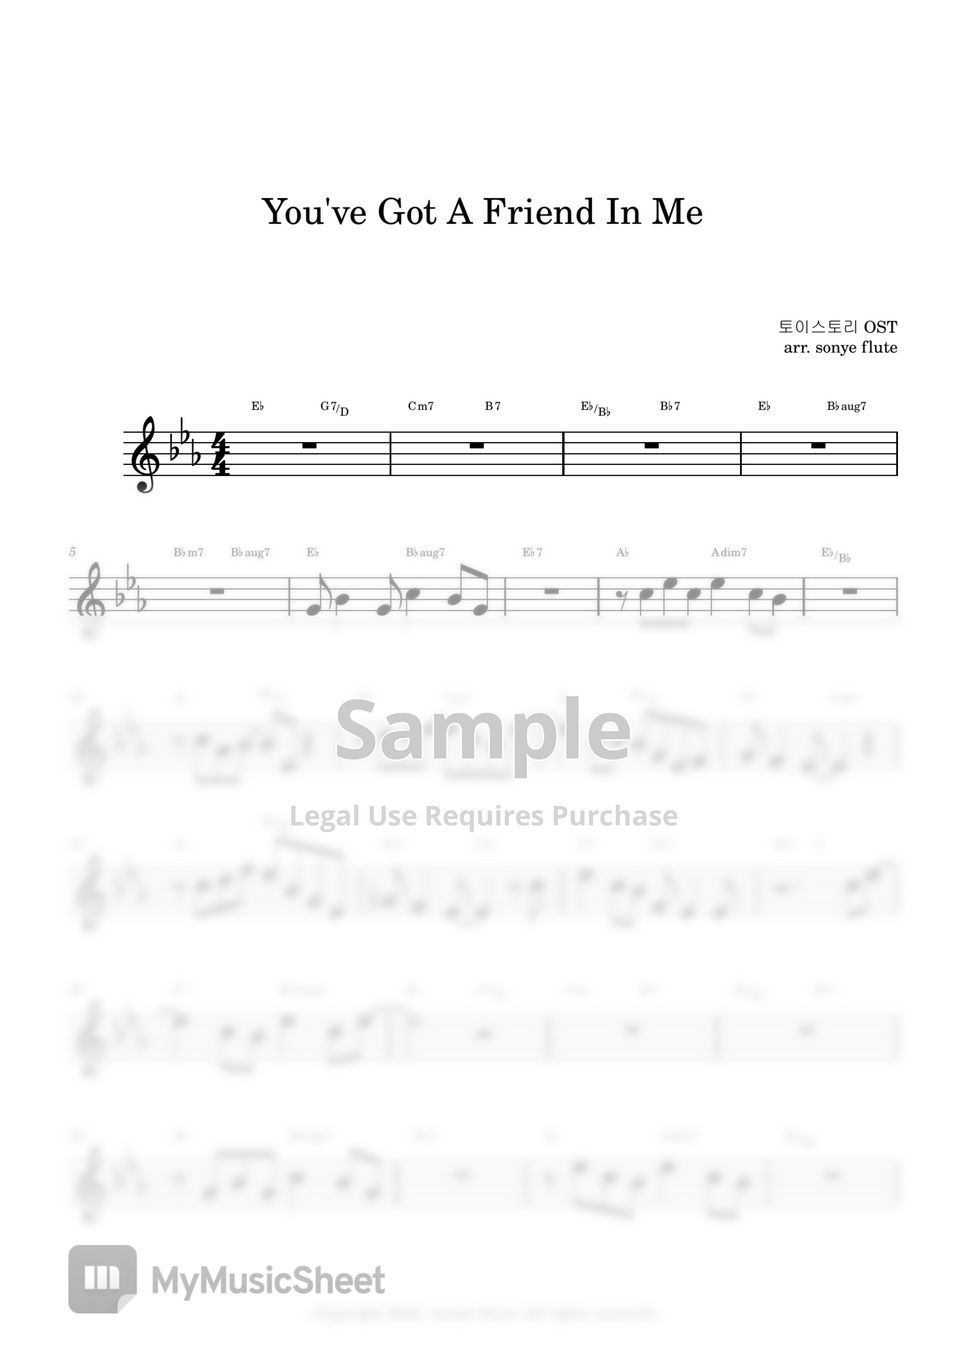 Toy Story OST - You've Got A Friend In Me (Flute Sheet Music) by sonye flute